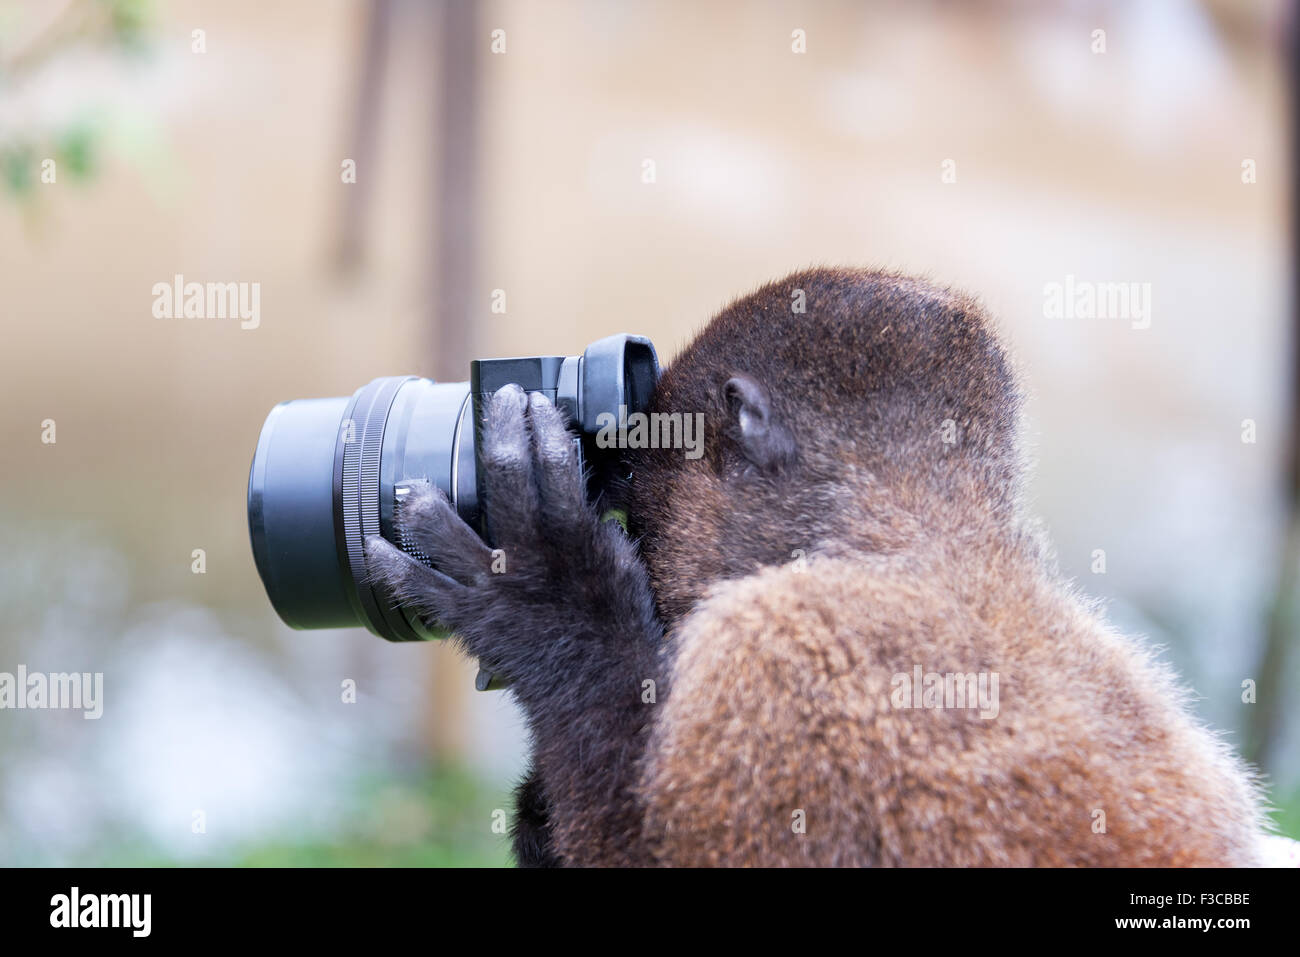 Woolly monkey using a camera in the Amazon near Iquitos, Peru Stock Photo